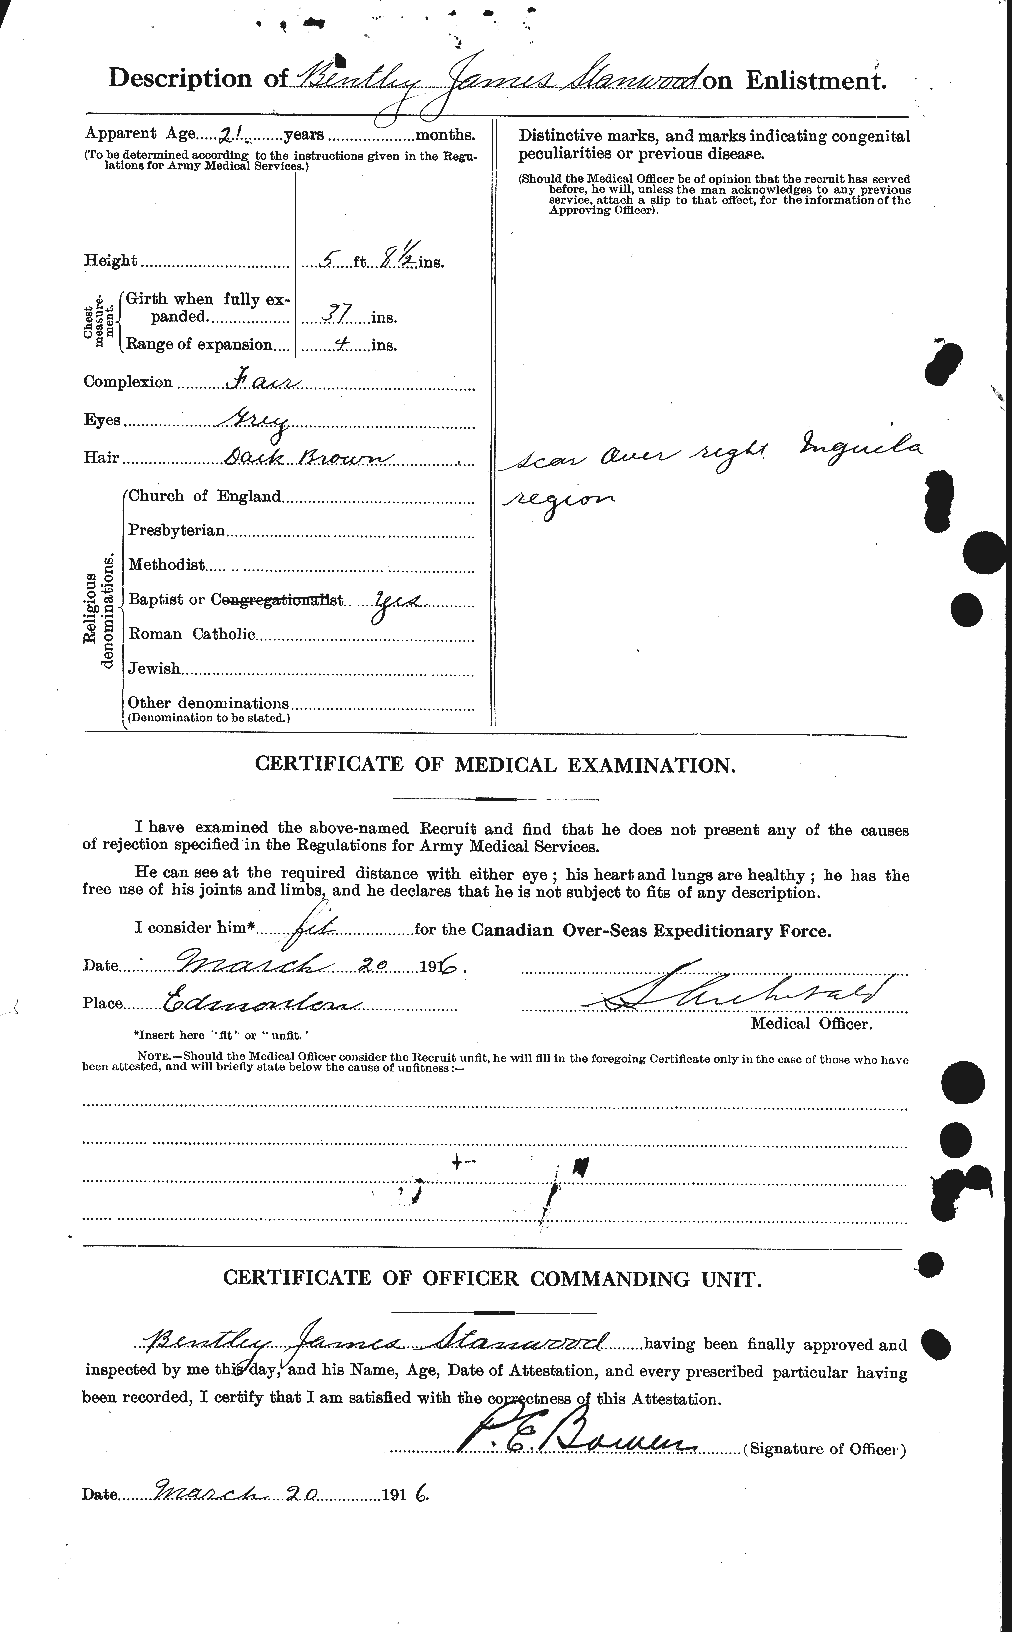 Personnel Records of the First World War - CEF 237888b